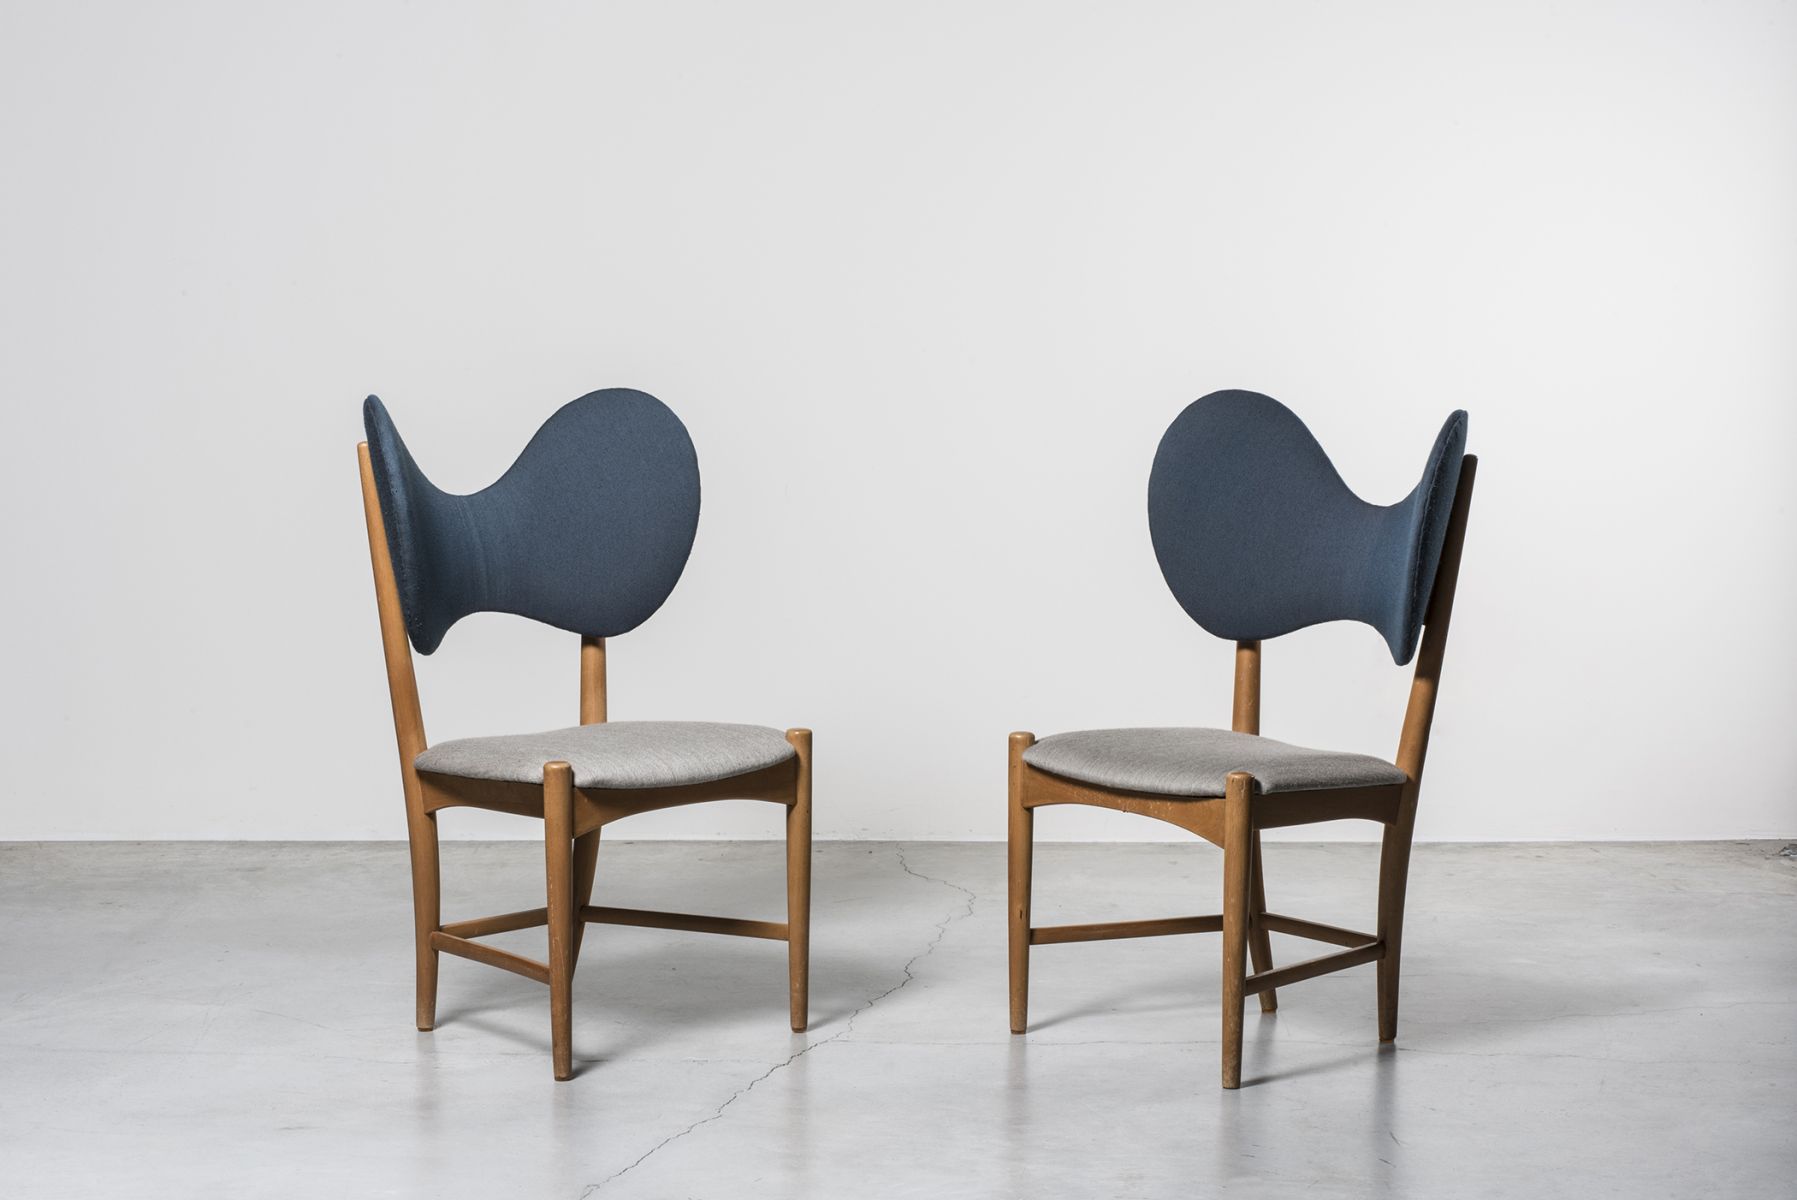 Two chairs Eva and Nils Koppel pic-1